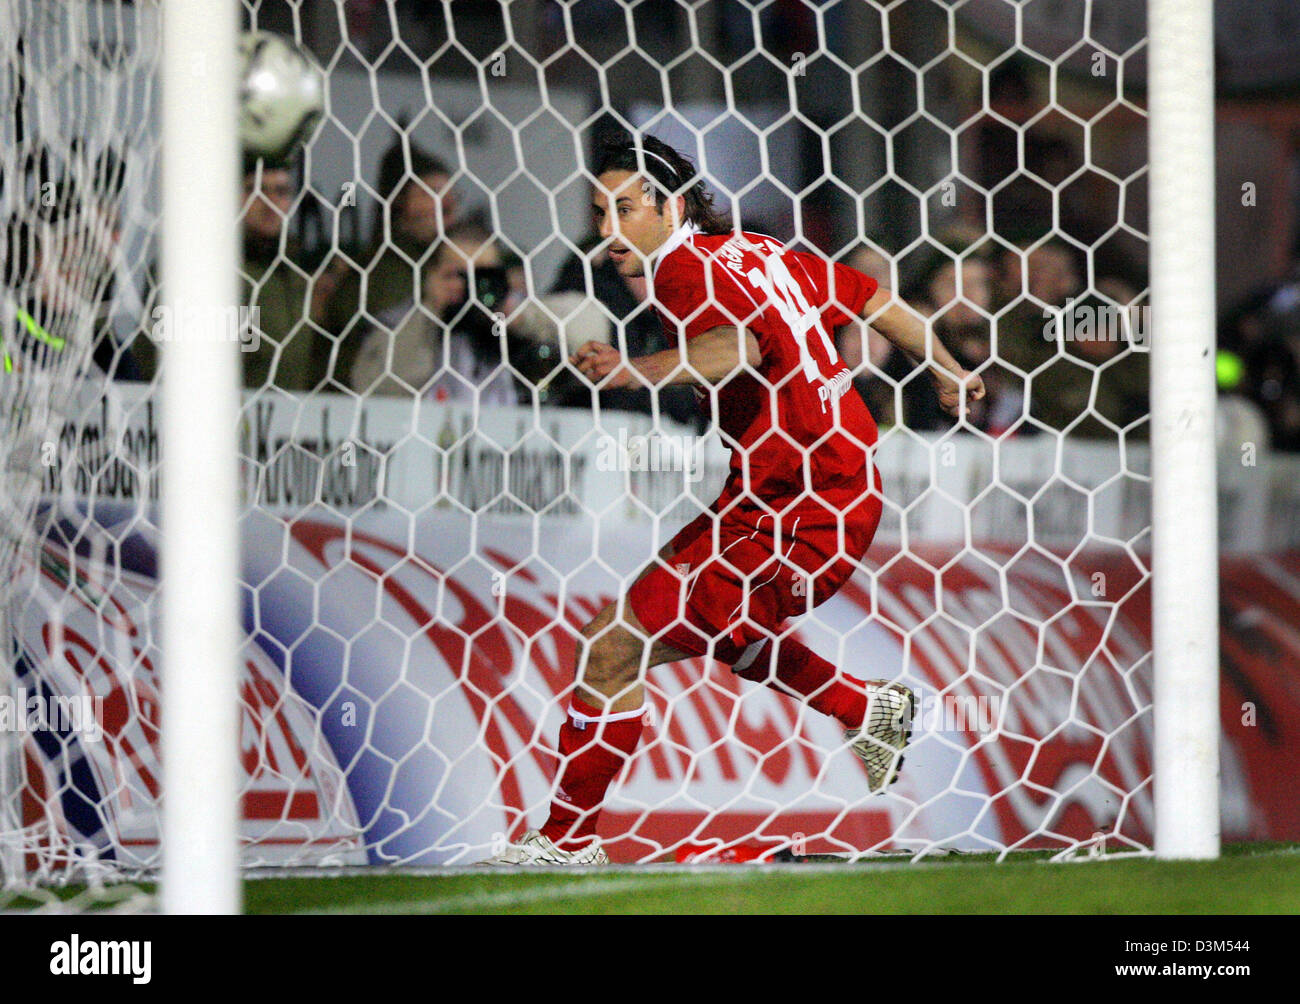 (dpa) - Bayern Munich's Claudio Pizarro looks at the ball through the net after scoring the 1-1 during the Bundesliga soccer match Arminia Bielefeld vs. Bayern Munich at the Schueco arena in Bielefeld, Germany, 19 November 2005. Pizarro was also able to score the 2-1 goal for the final score a few seconds prior to the final whistle. (Attention: NEW EMBARGO CONDITIONS! The DFL has p Stock Photo